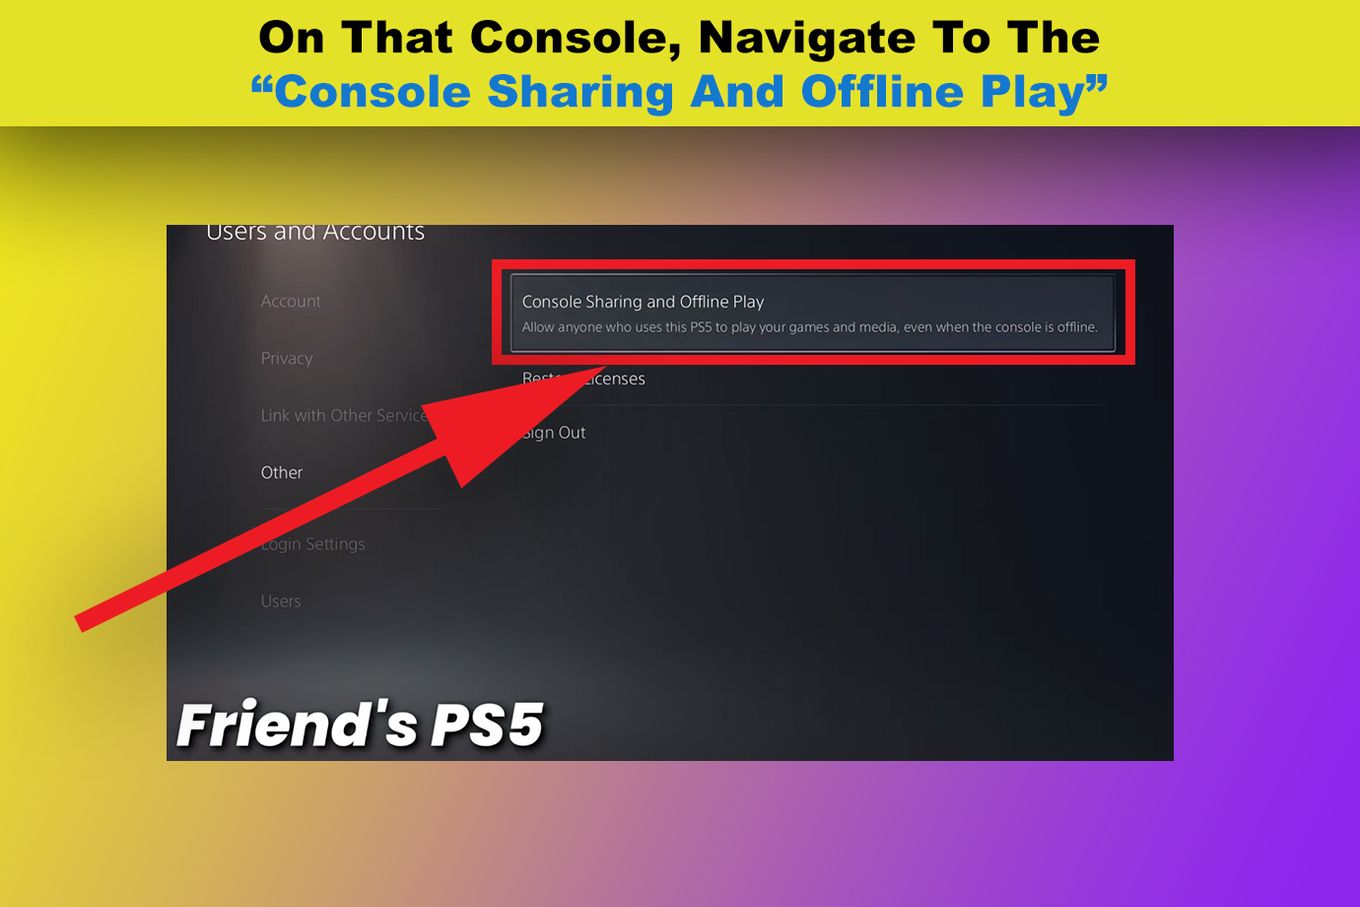 How to Gameshare on PS5 [Easy to Follow Step-by-Step Guide]